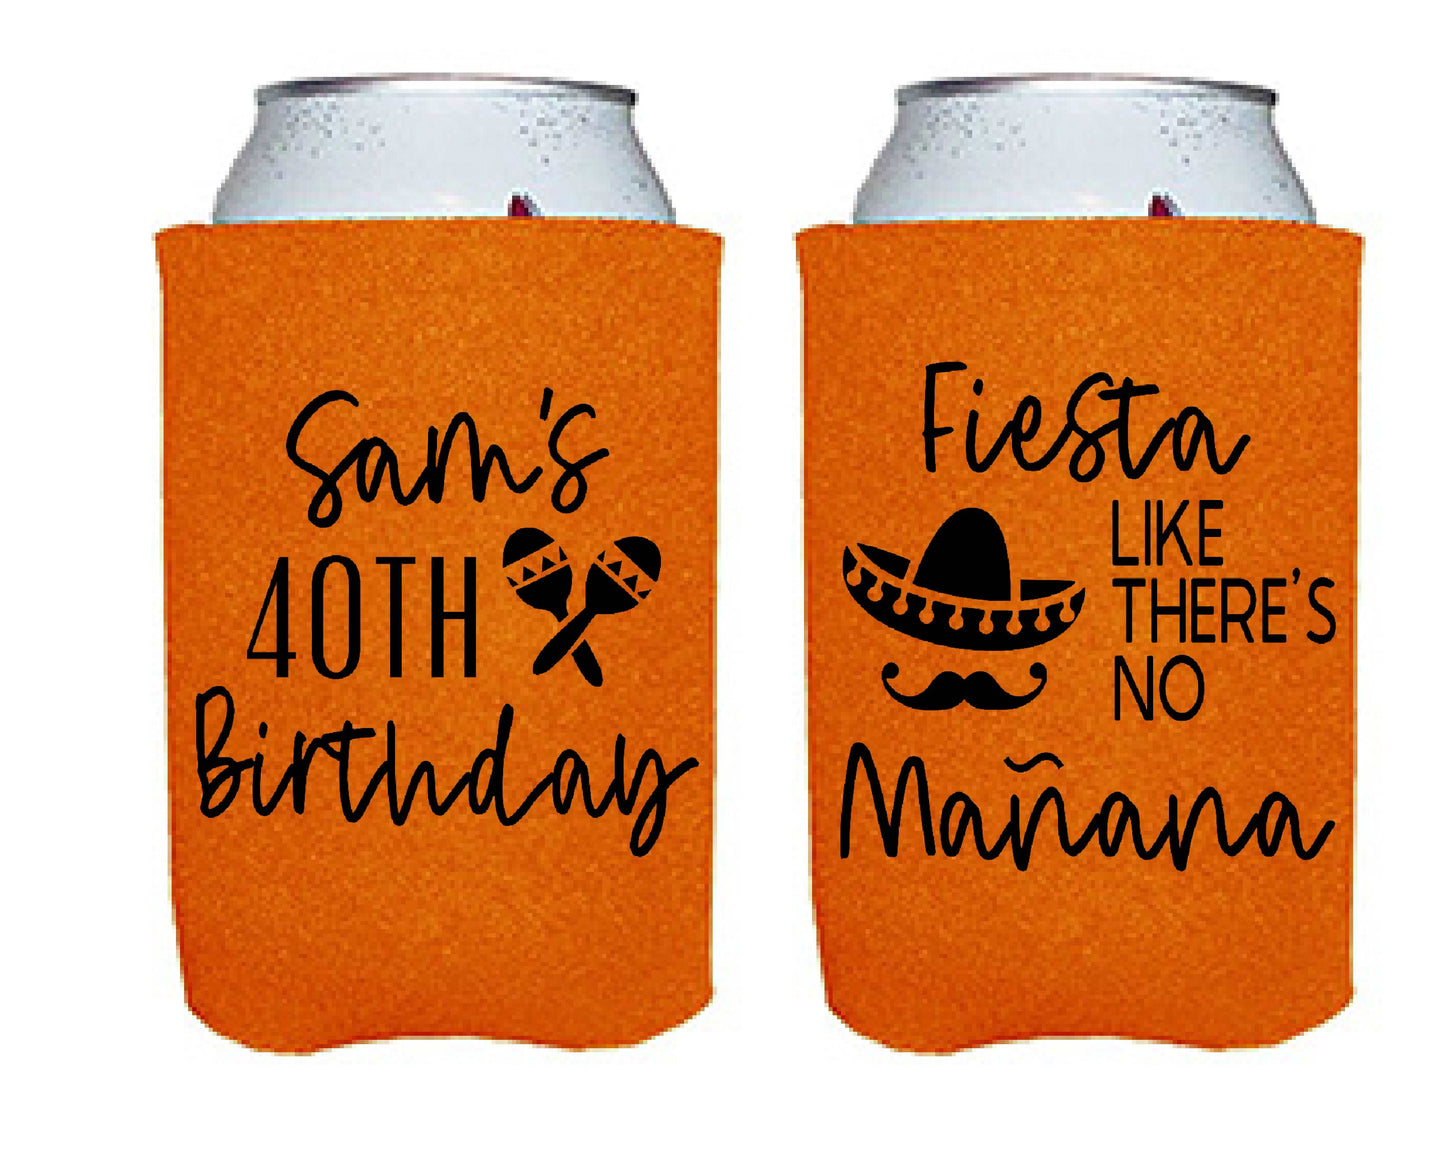 Fiesta Like There's No Manana Birthday Party Favor Screen Printed Can Cooler